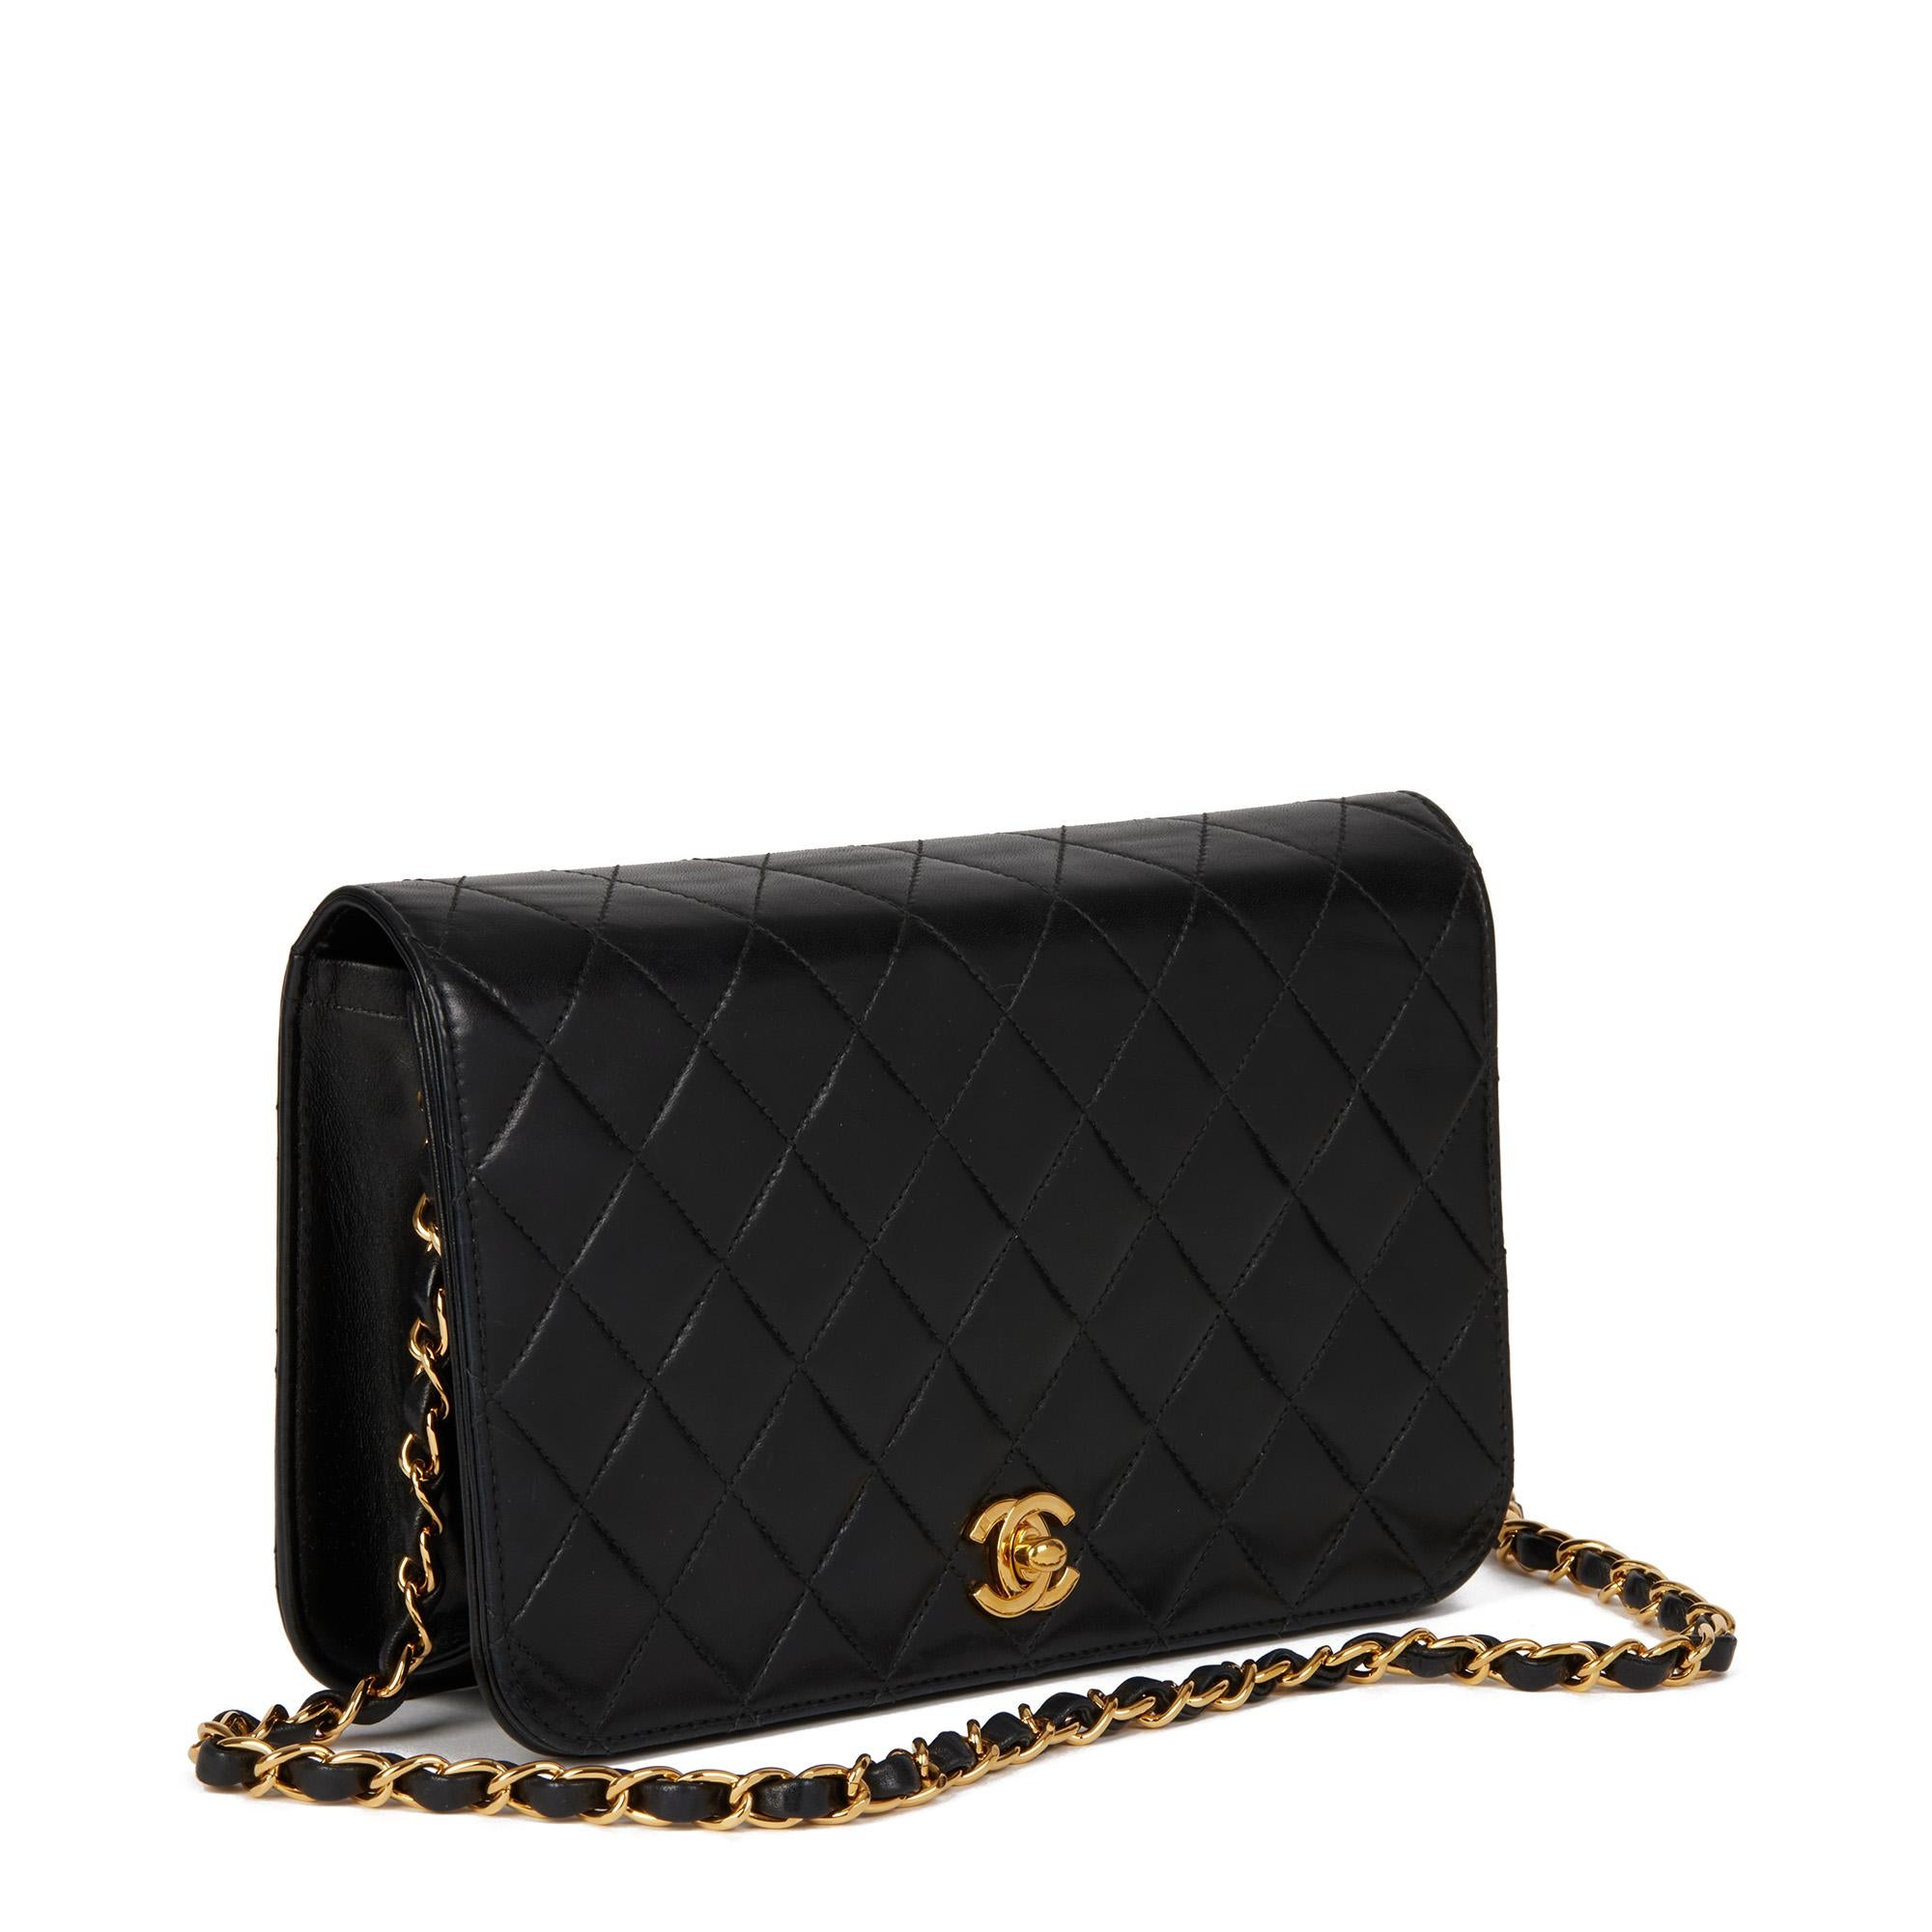 CHANEL
Black Quilted Lambskin Vintage Small Classic Single Full Flap Bag

Xupes Reference: HB4522
Serial Number: 6955722
Age (Circa): 2002
Accompanied By: Chanel Dust Bag, Authenticity Card
Authenticity Details: Authenticity Card, Serial Sticker